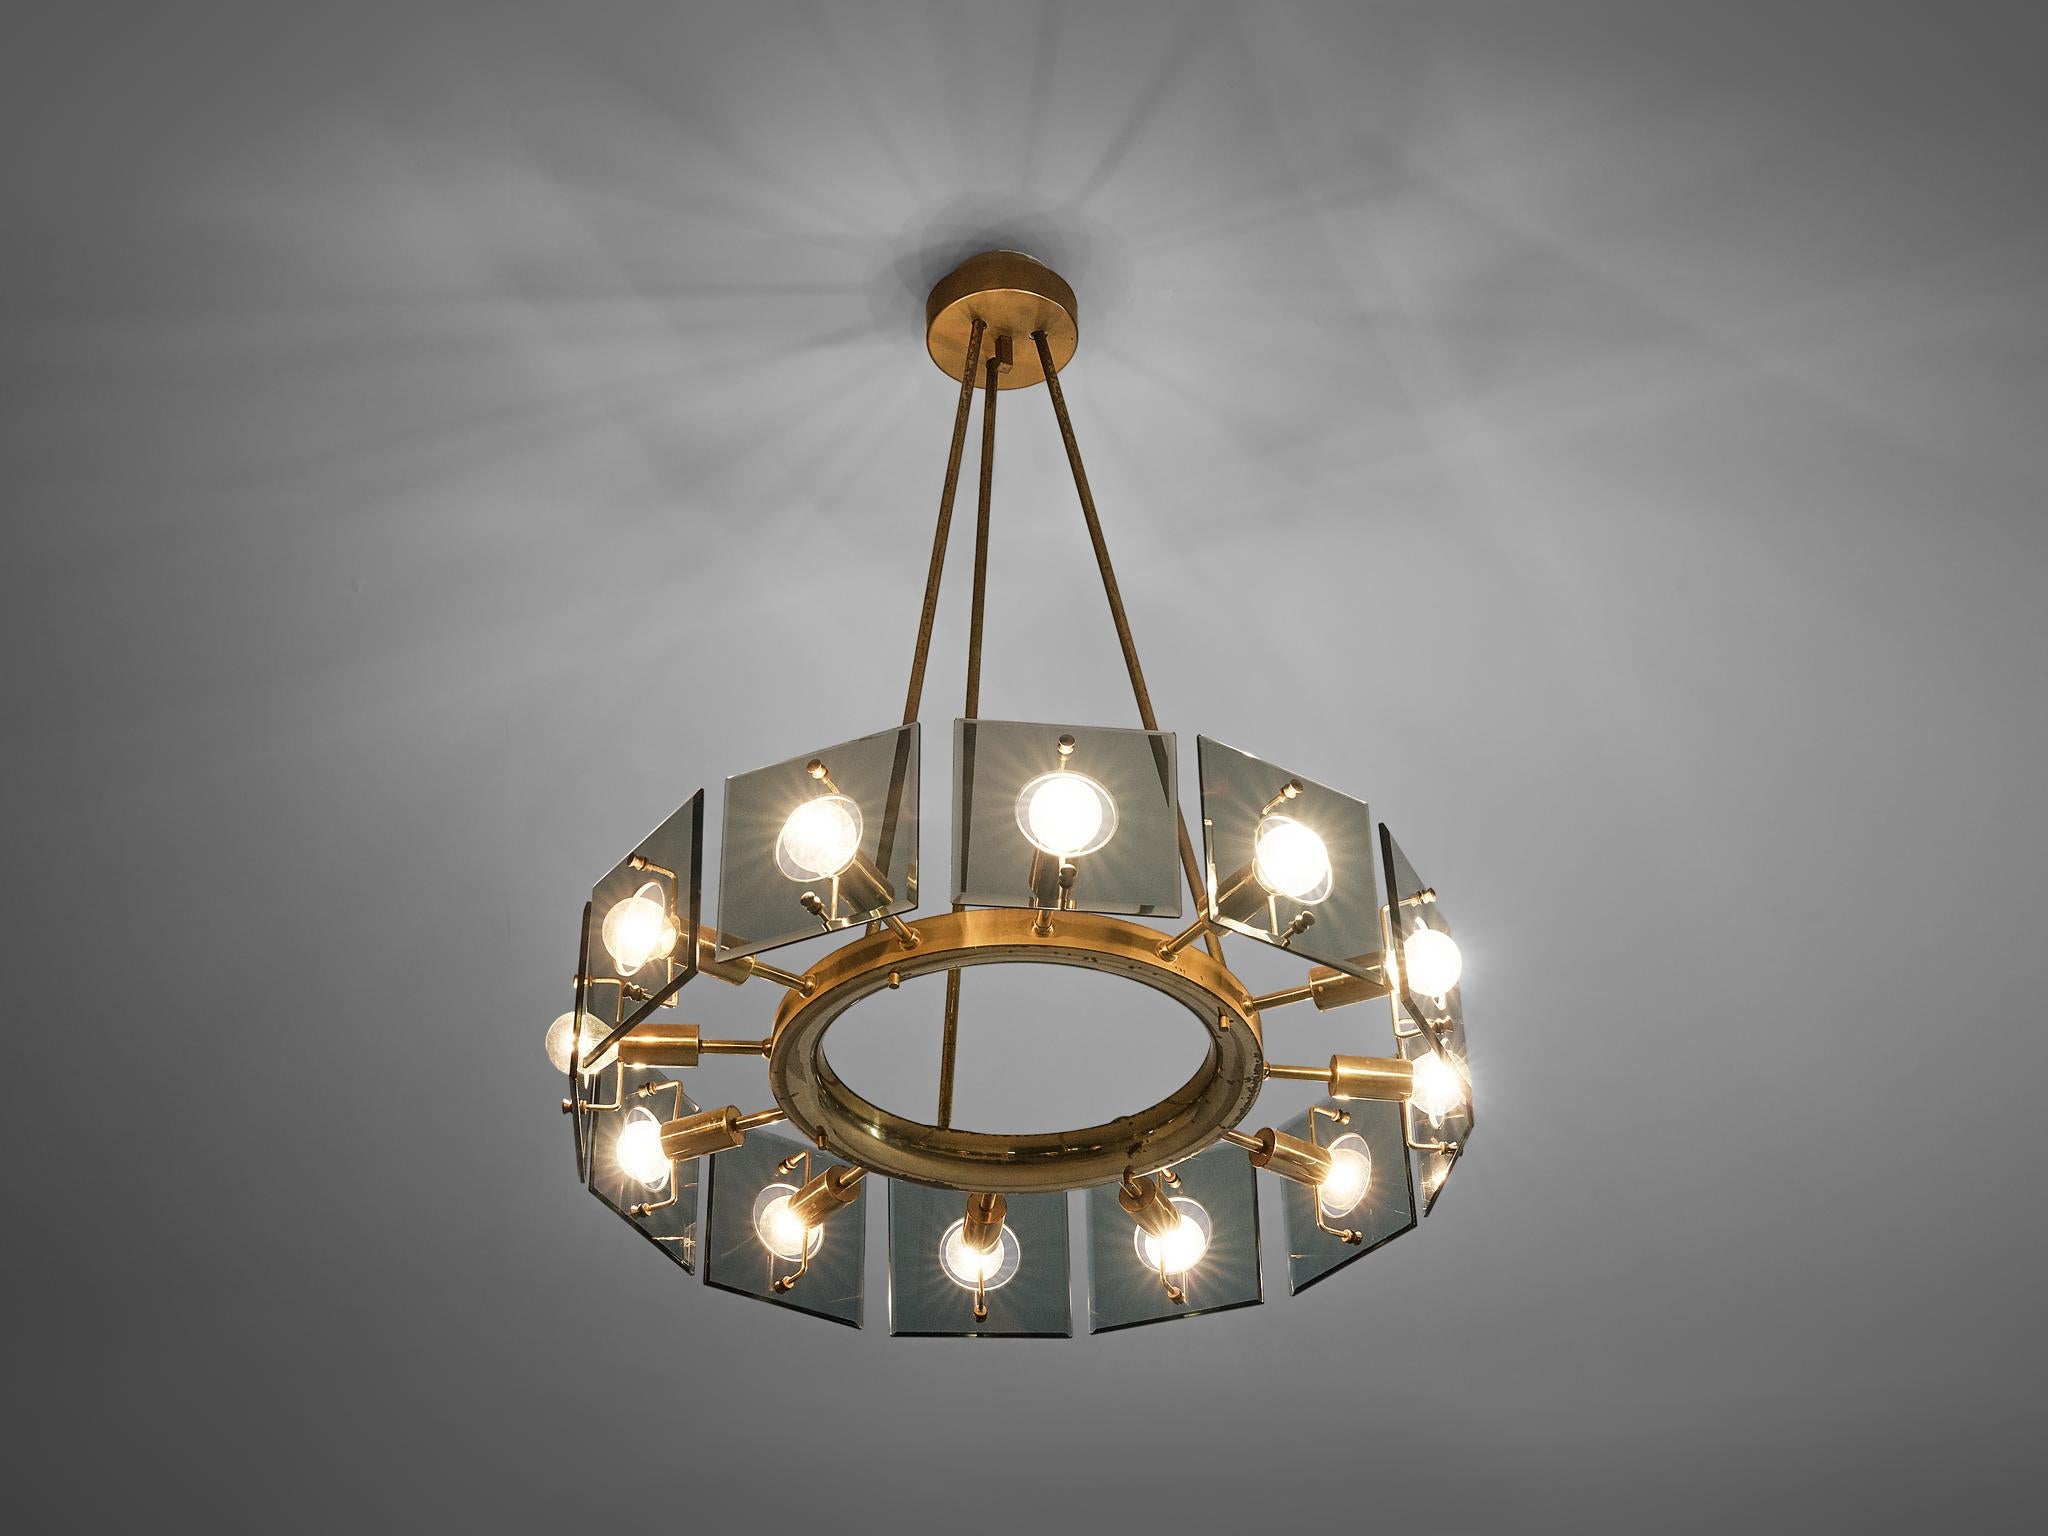 Gino Paroldo chandelier, glass, metal, brass, Italy, 1960s

Stunning round chandelier in glass, metal and brass designed by Gino Paroldo. A round center holds 12 light bulbs behind tempered squared glass plates. The circle is held by three thin bars